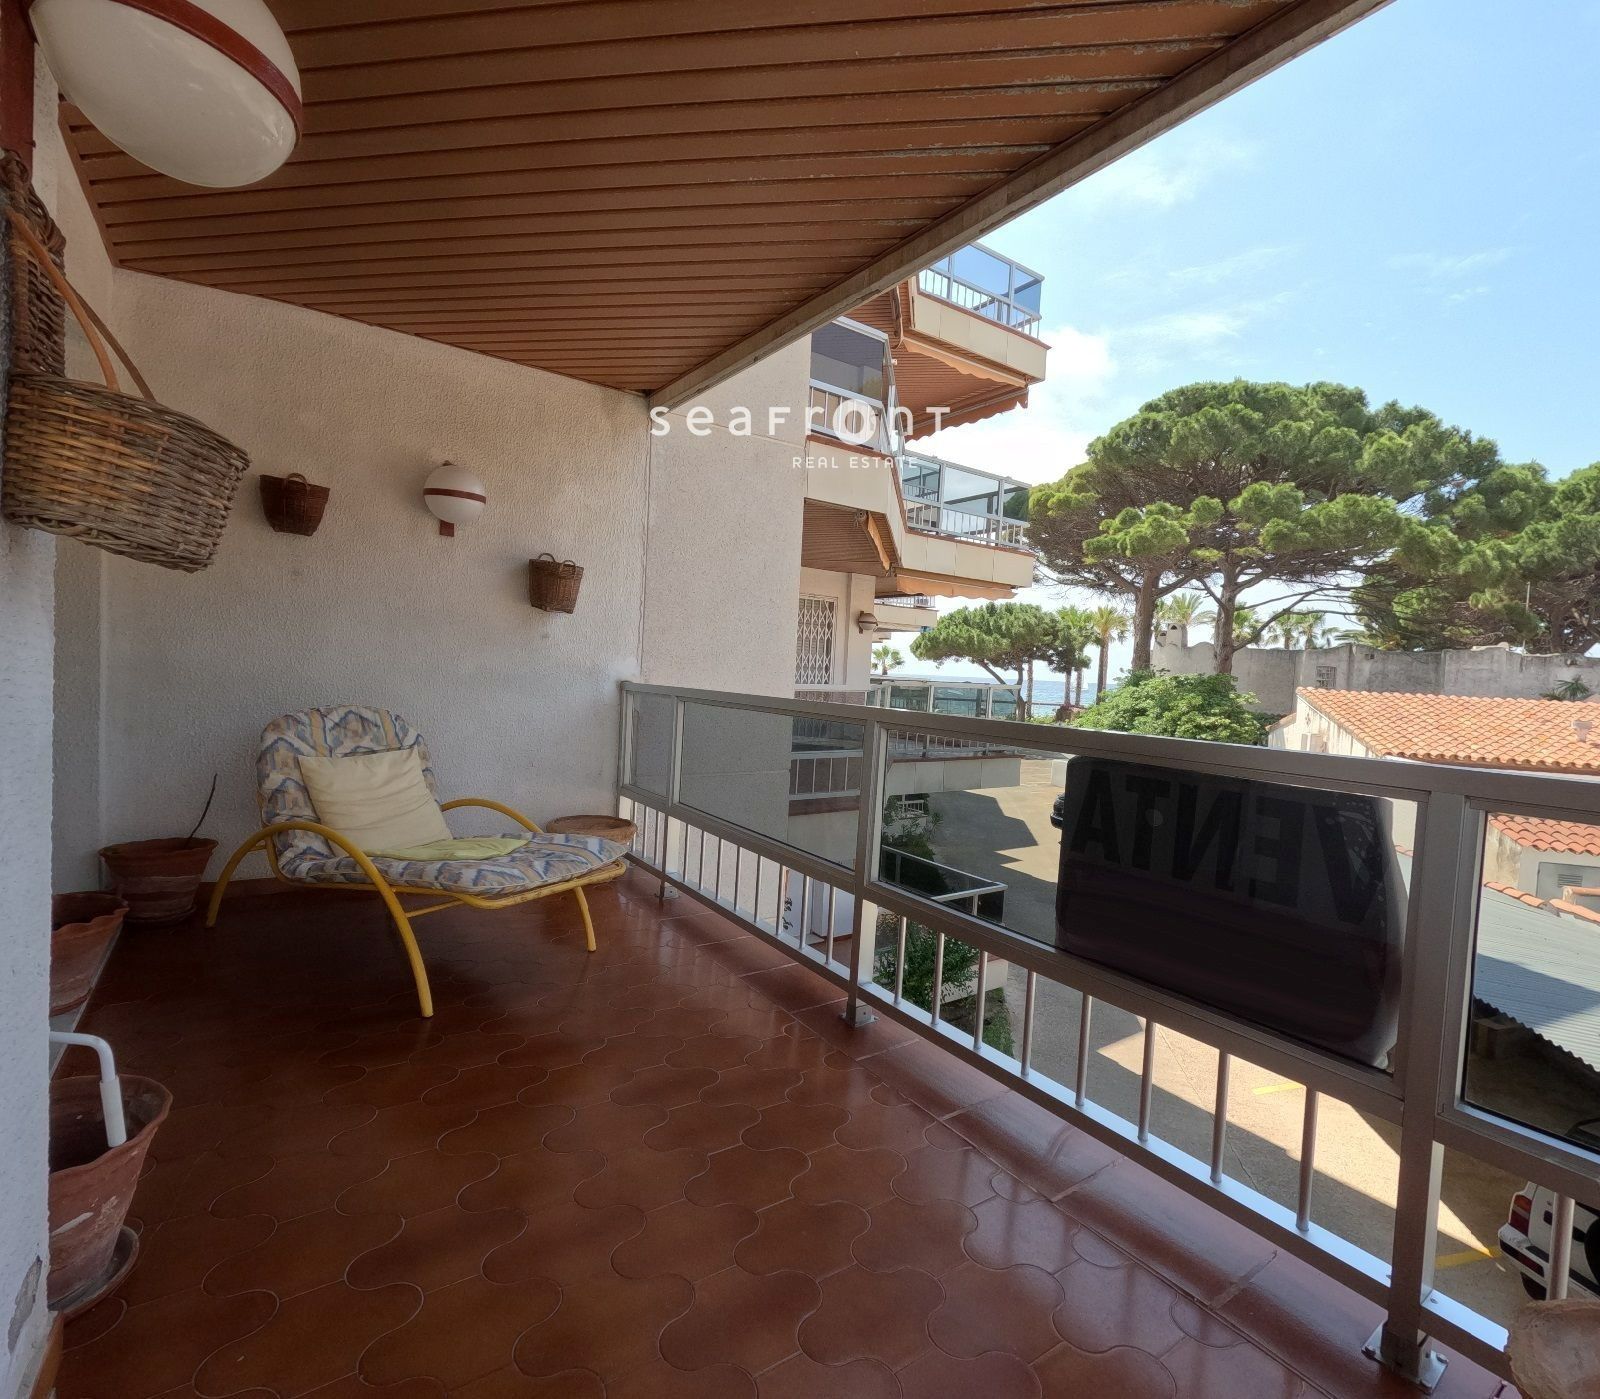 Apartment for sale on the seafront in Avinguda Diputació, in Vilafortuny, Cambrils